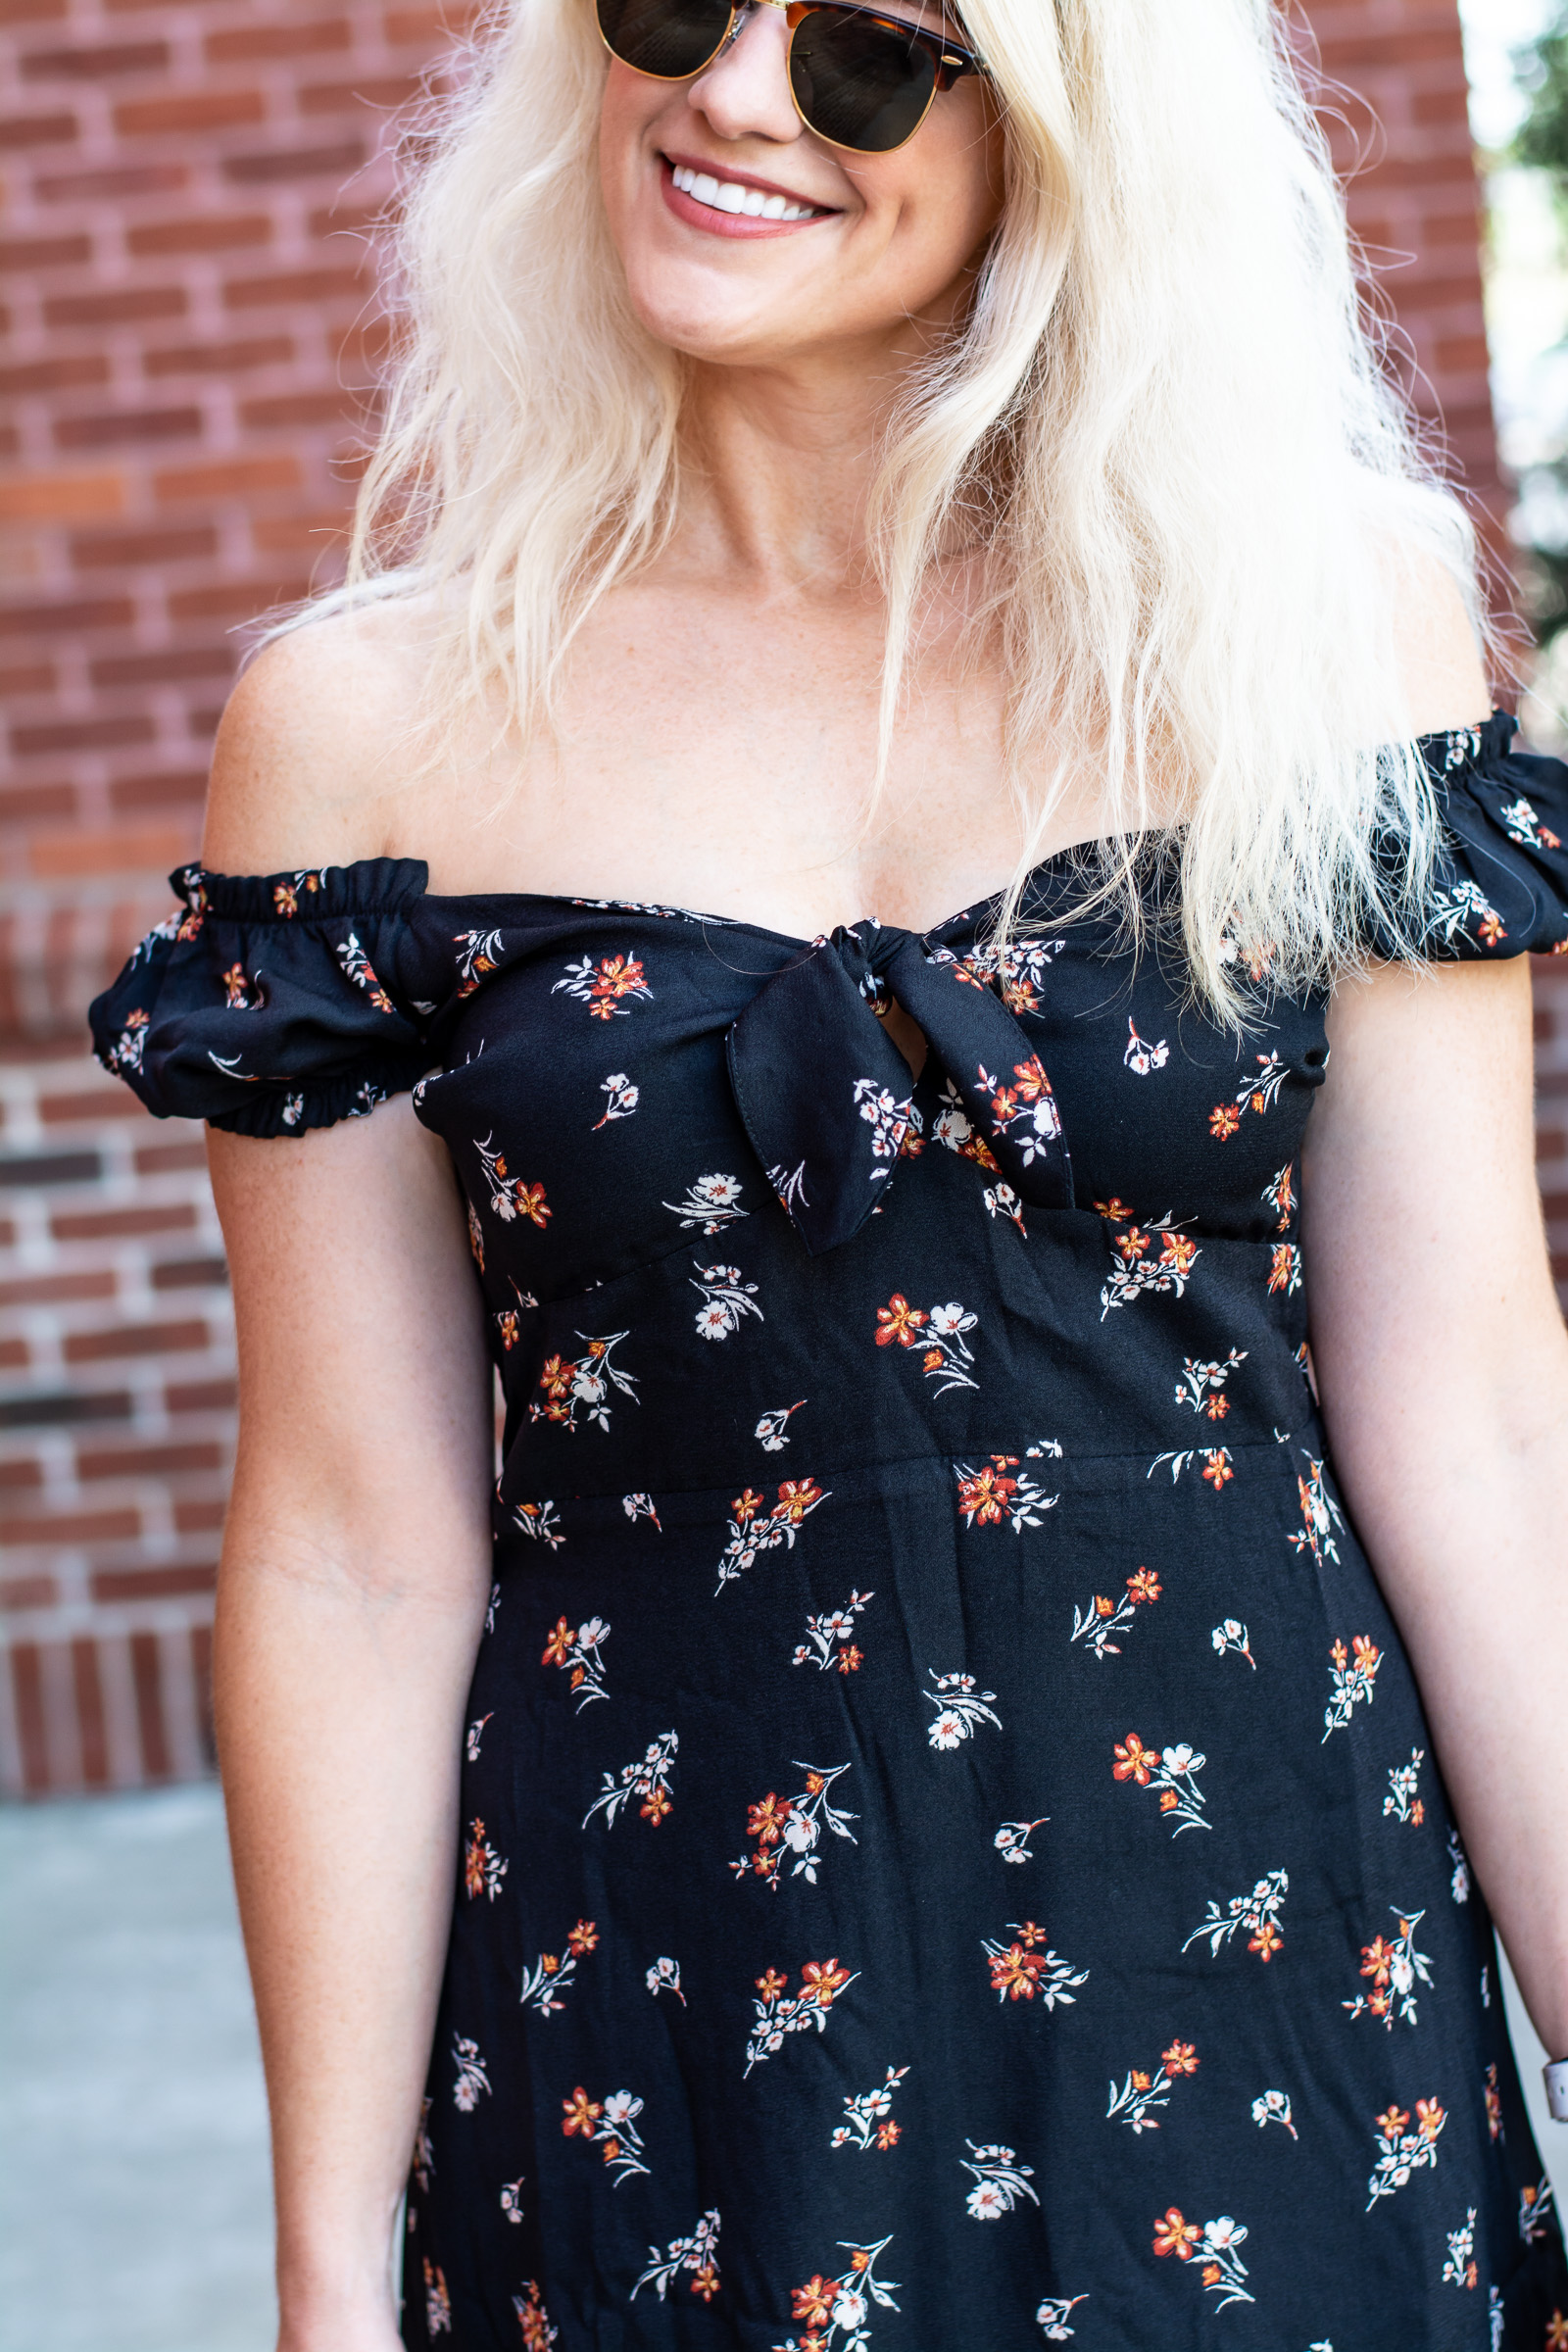 Outfit Idea: Black Floral Off-the-Shoulder Dress + Sneakers. | Ash from LSR